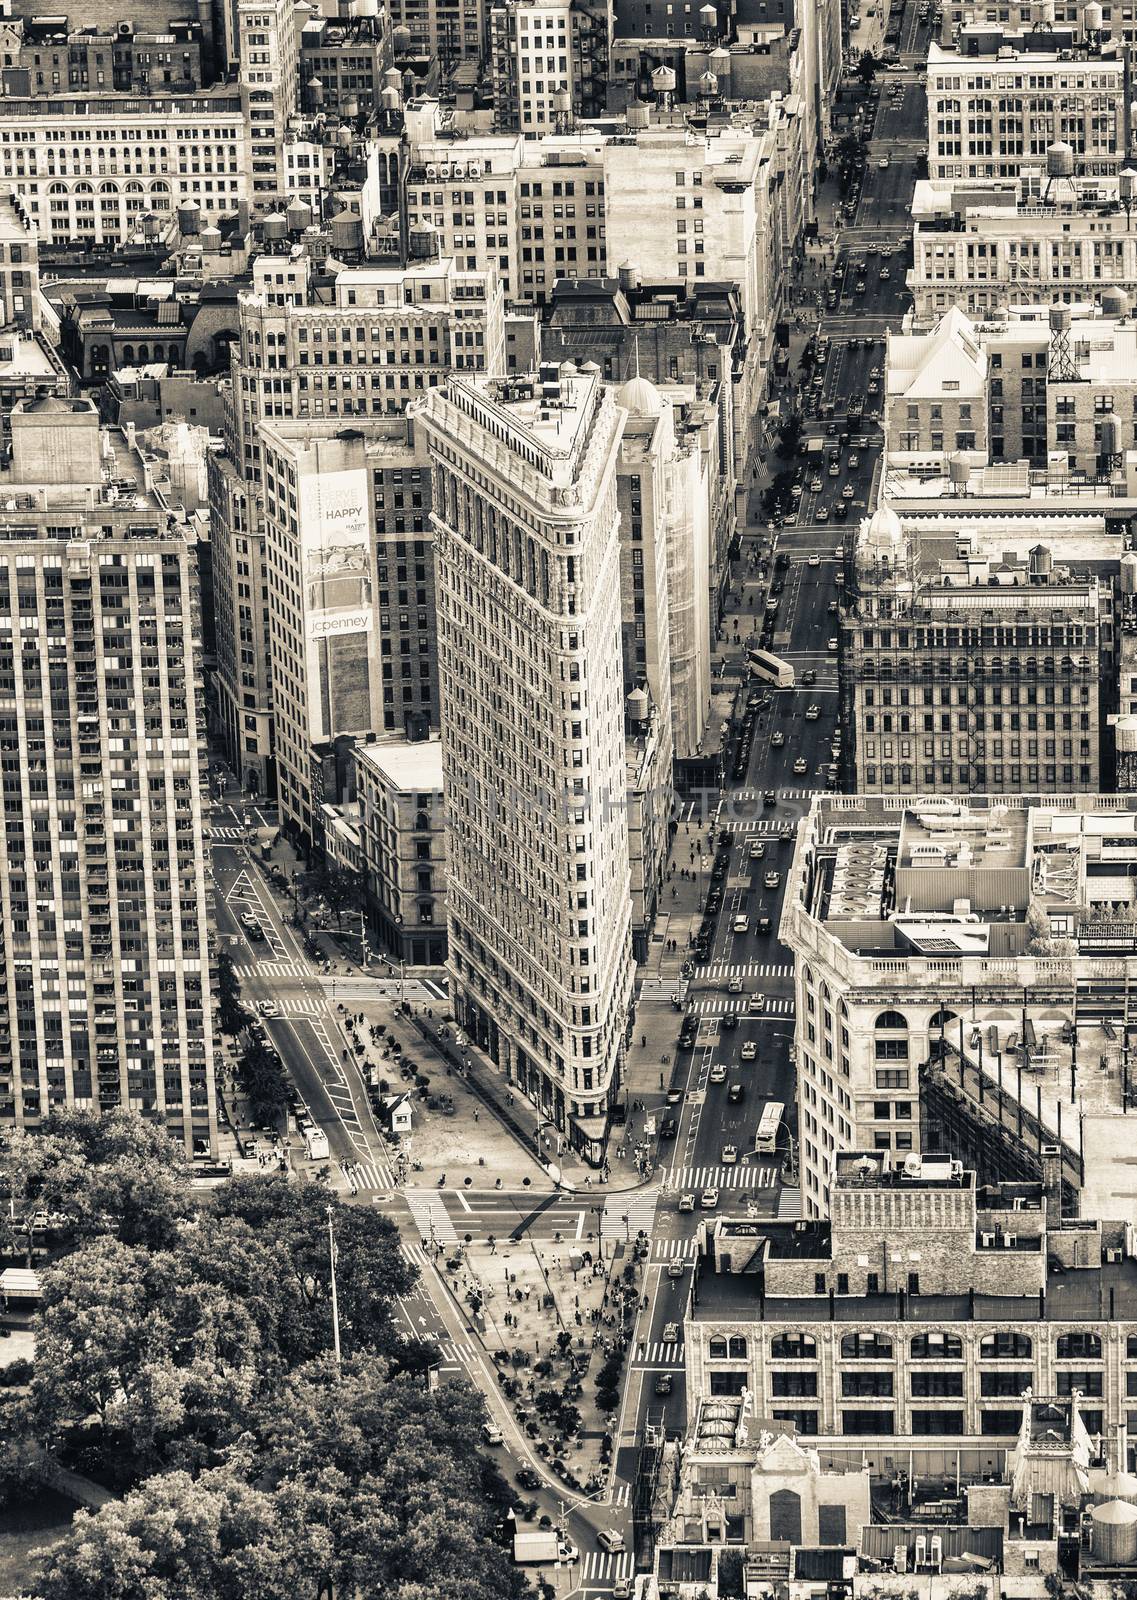 NEW YORK, NY, USA - JUNE 9: Aerial view of Flat Iron building, built in 1902 is of the first skyscrapers ever built, taken on June 9, 2013 in New York City, United States